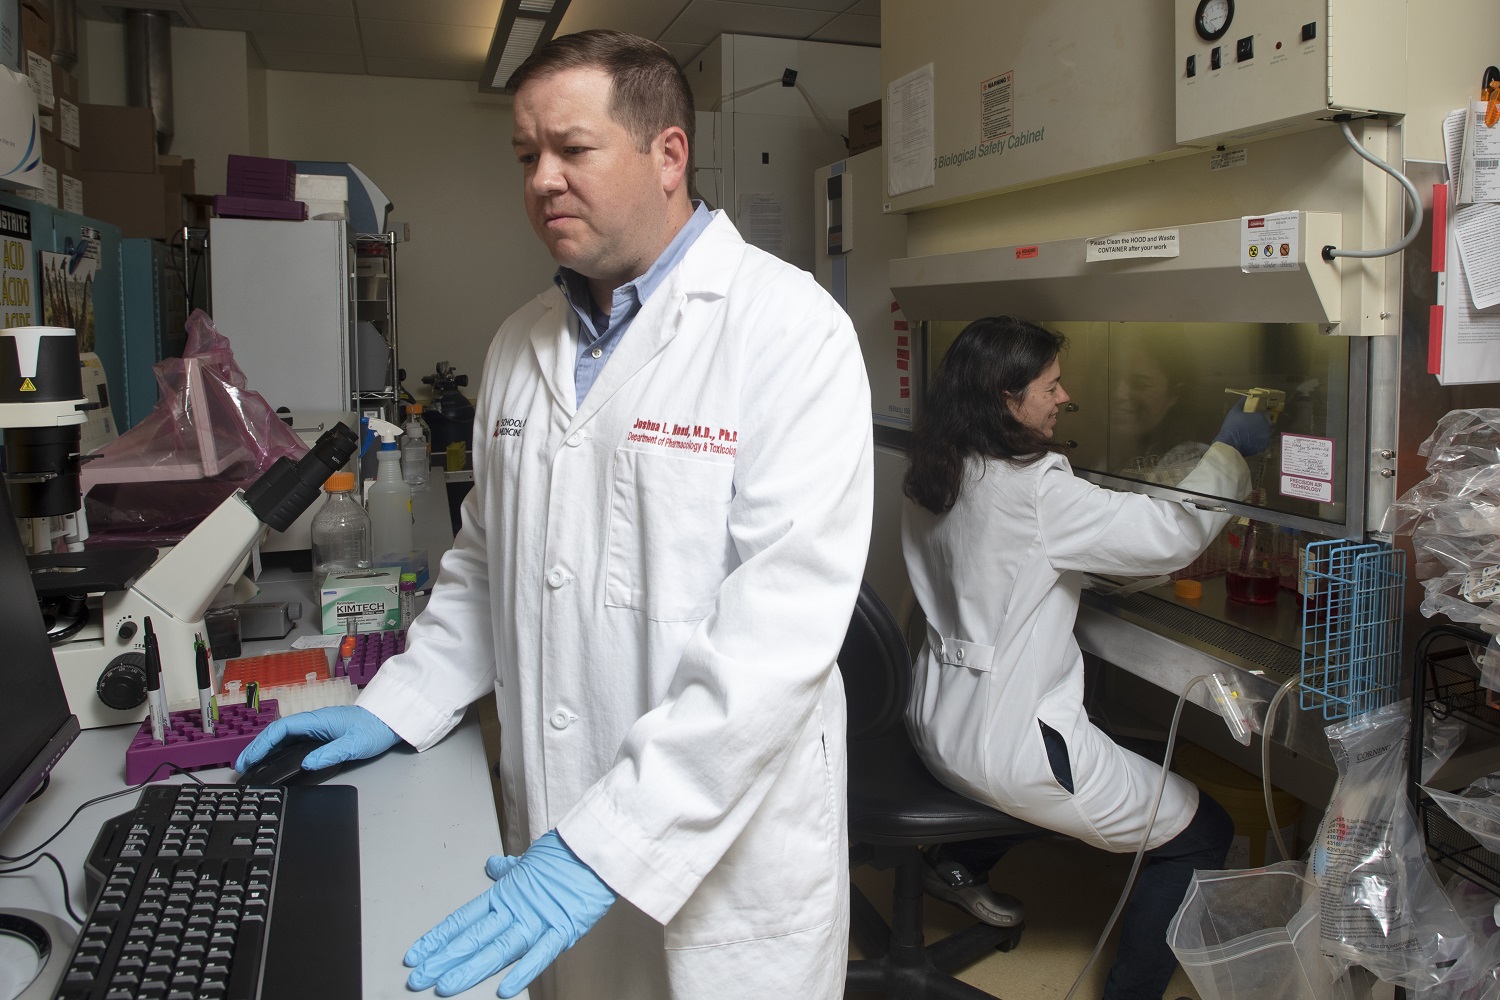 Craig McClain, M.D., right, with Matthew Cave, M.D., liver researcher and H&T COBRE core director, center, and Jamie Young, Ph.D., using equipment known as the NanoDrop instrument to analyze RNA and DNA samples.